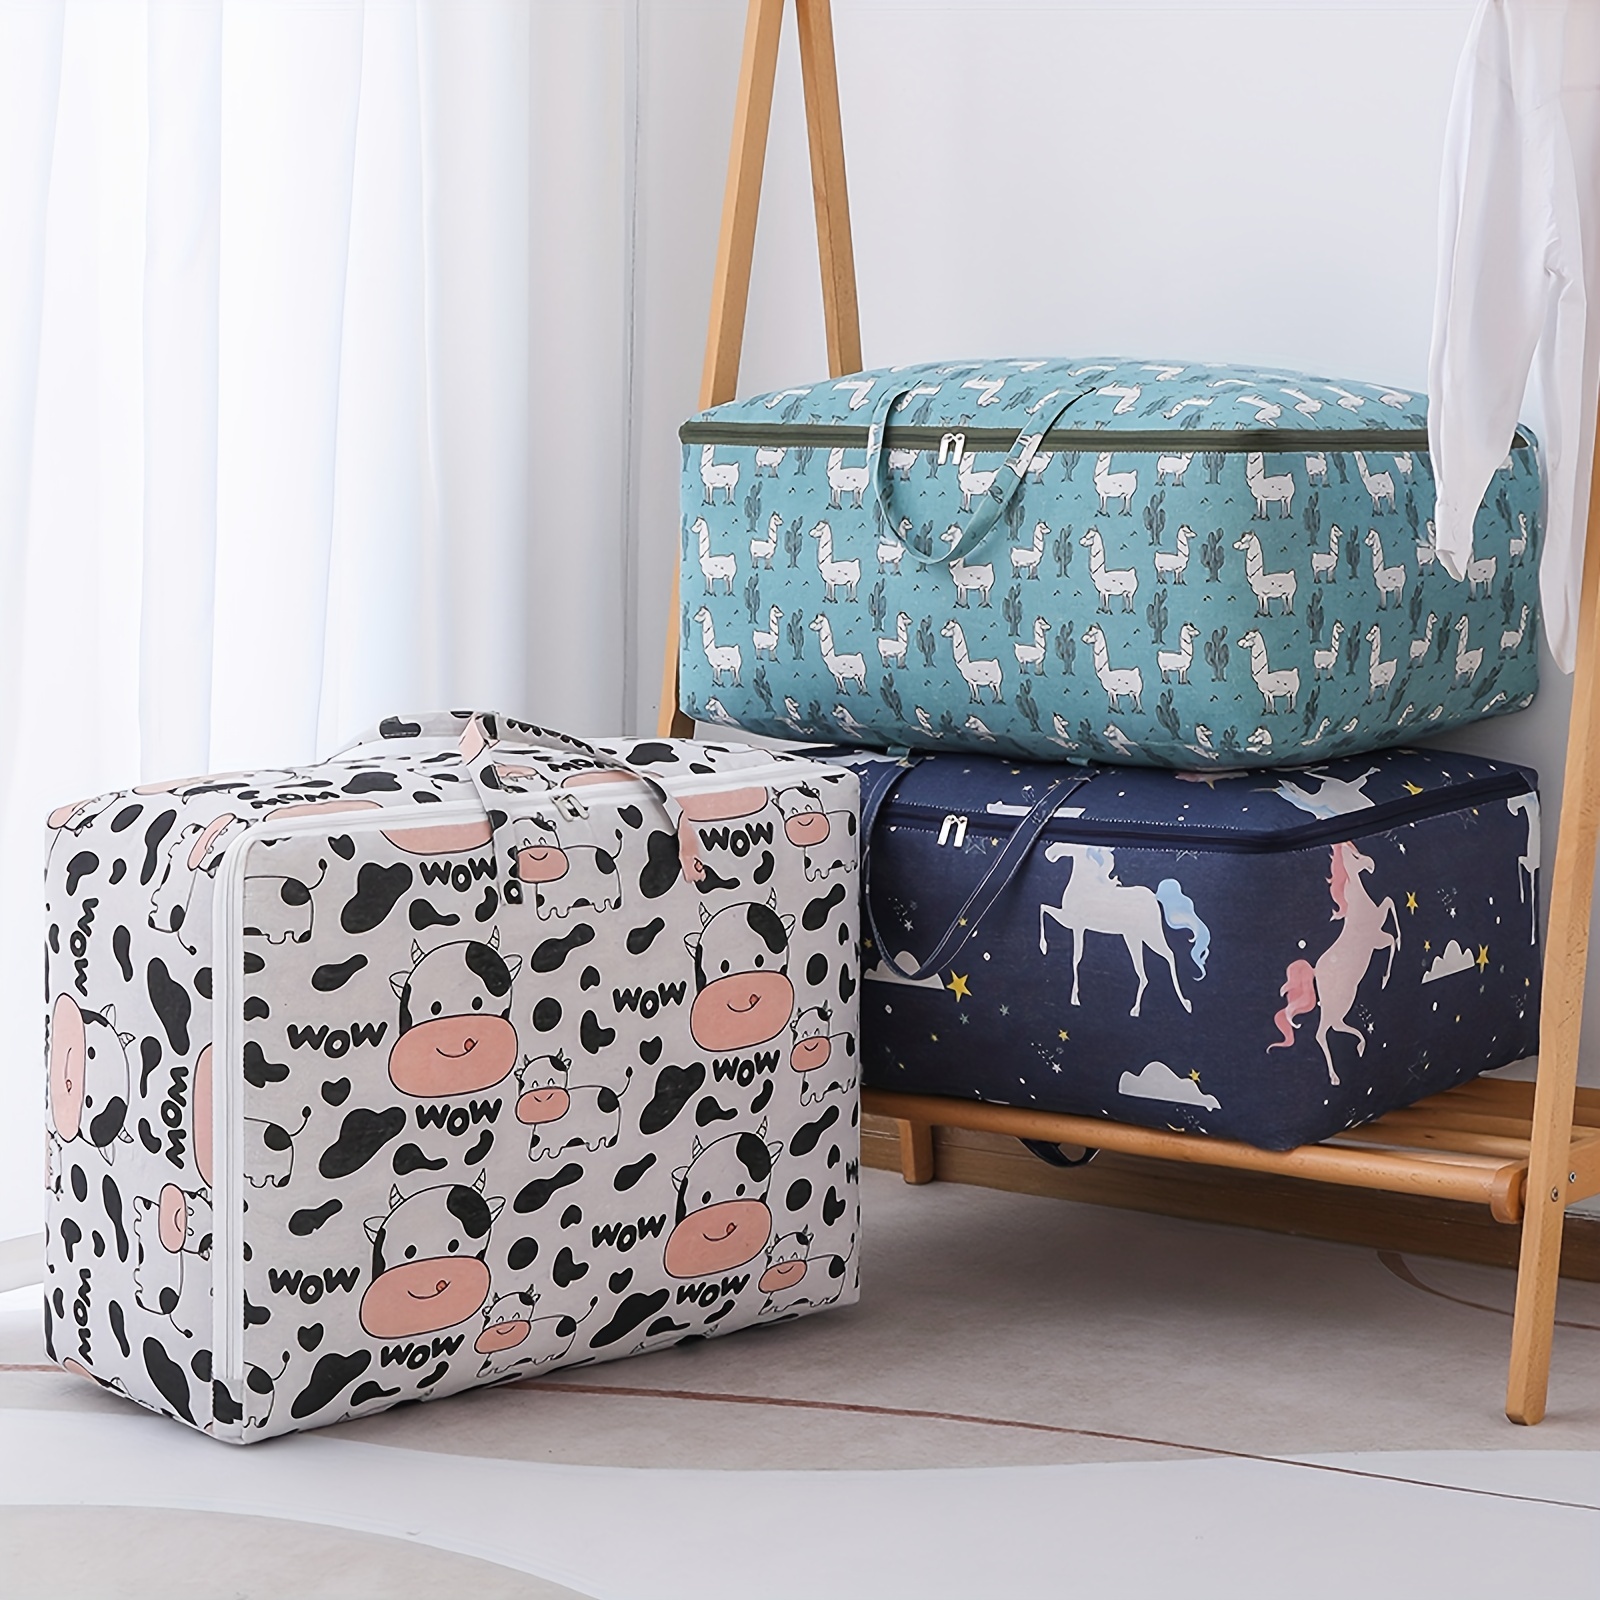 Printed Waterproof Quilt Storage Bag Portable Clothes Bed Linen